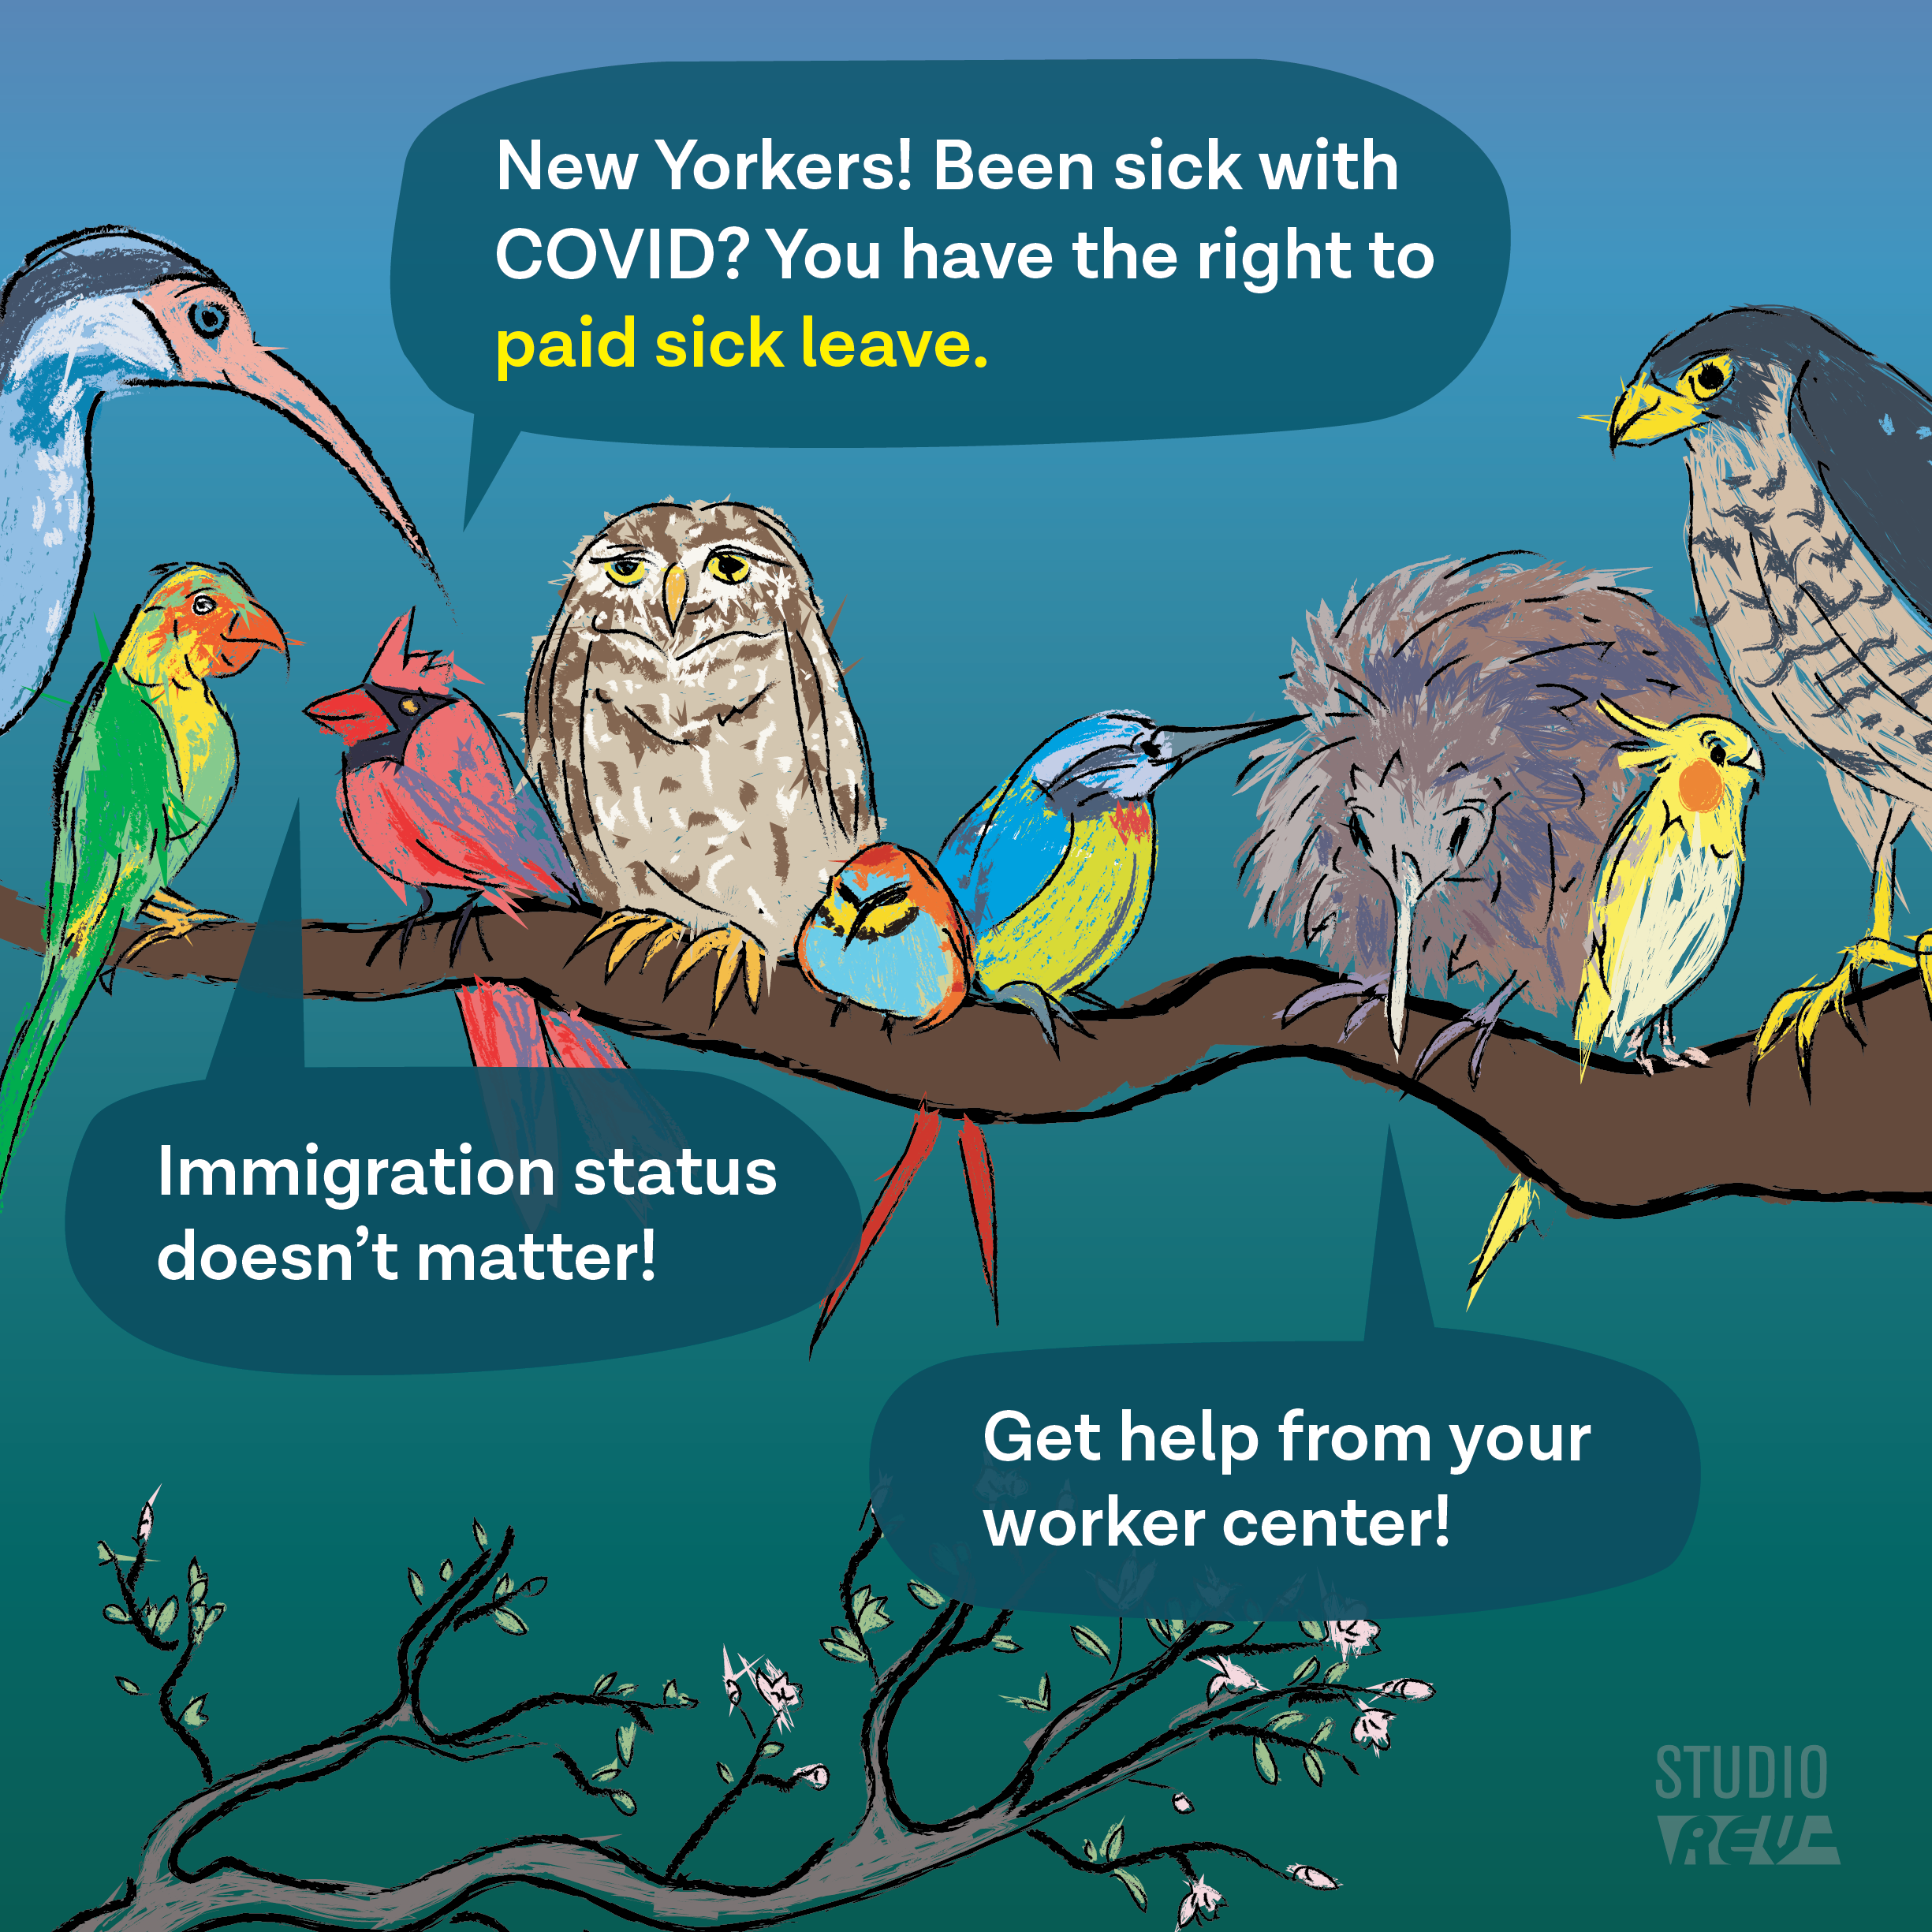 NYC_PaidSickLeave_Eng.png